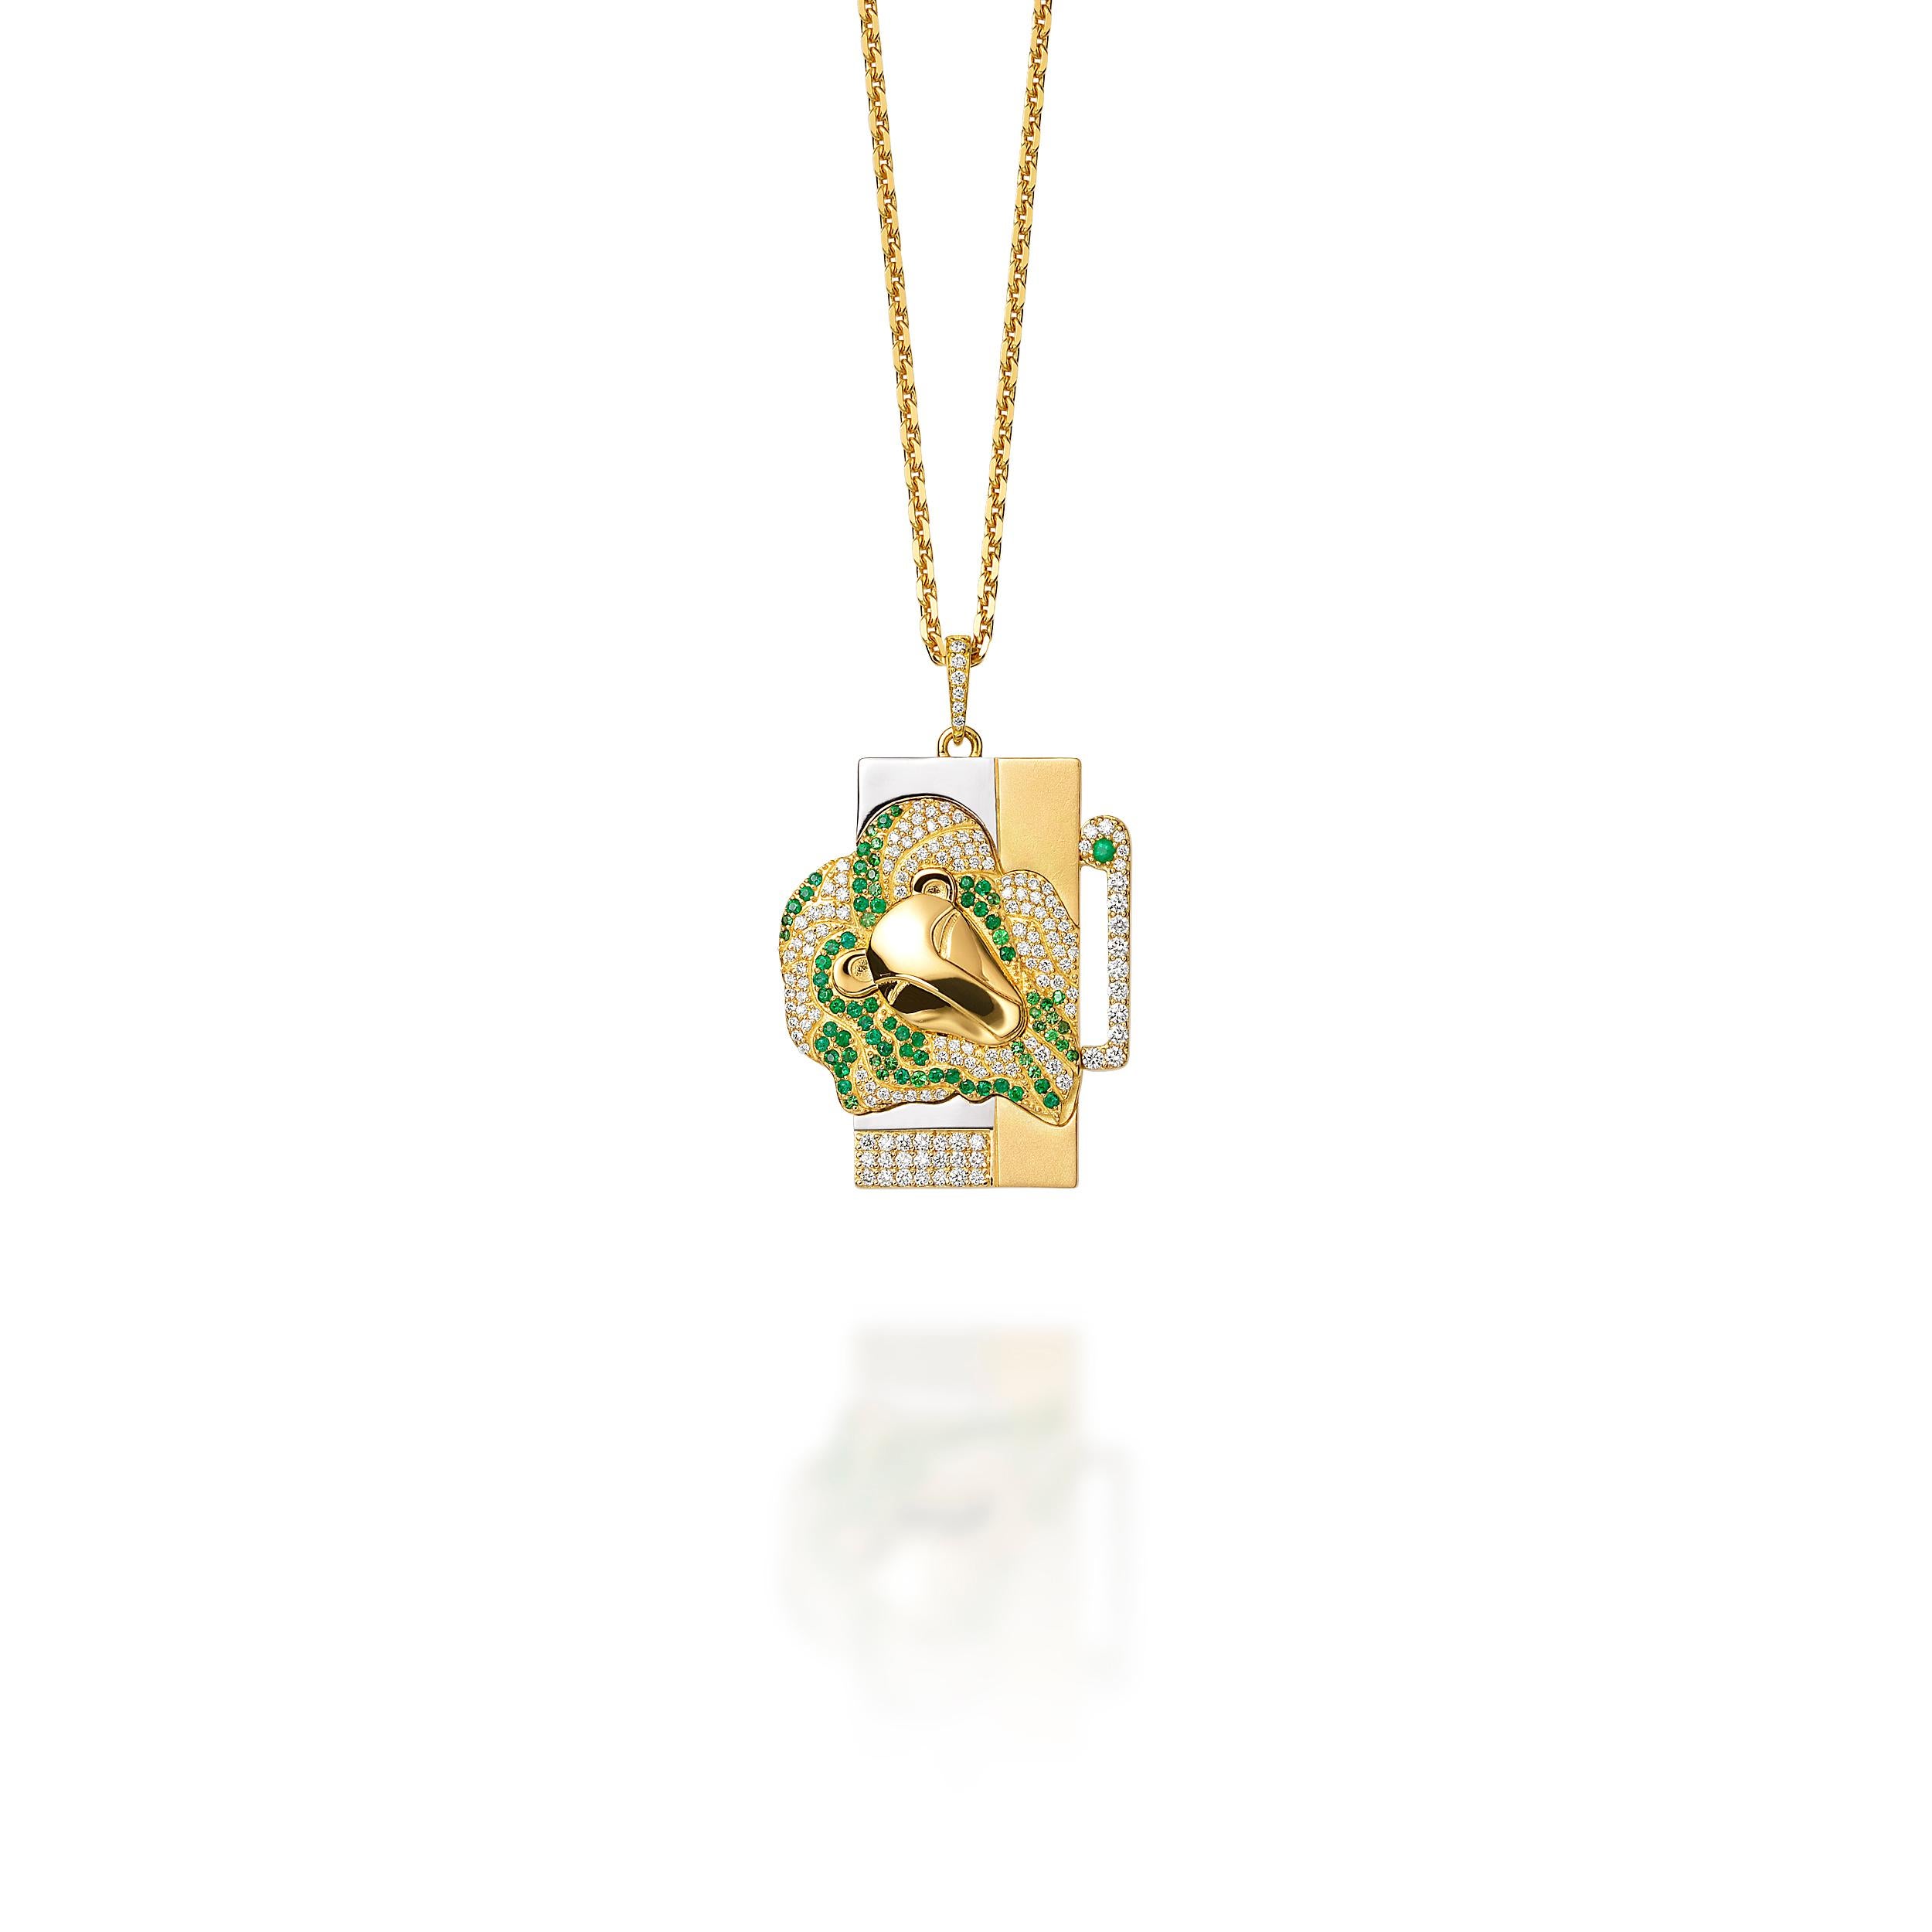 Lion Pendant - sincerely generous, dignified and magnetic with a love for luxury and exclusivity in splendor. Allow your intuition and clairvoyance to be powered by Diamonds.

Jazychic Zodiac Pendant 18k Gold with 0.92 ct Diamonds and 0.53 ct